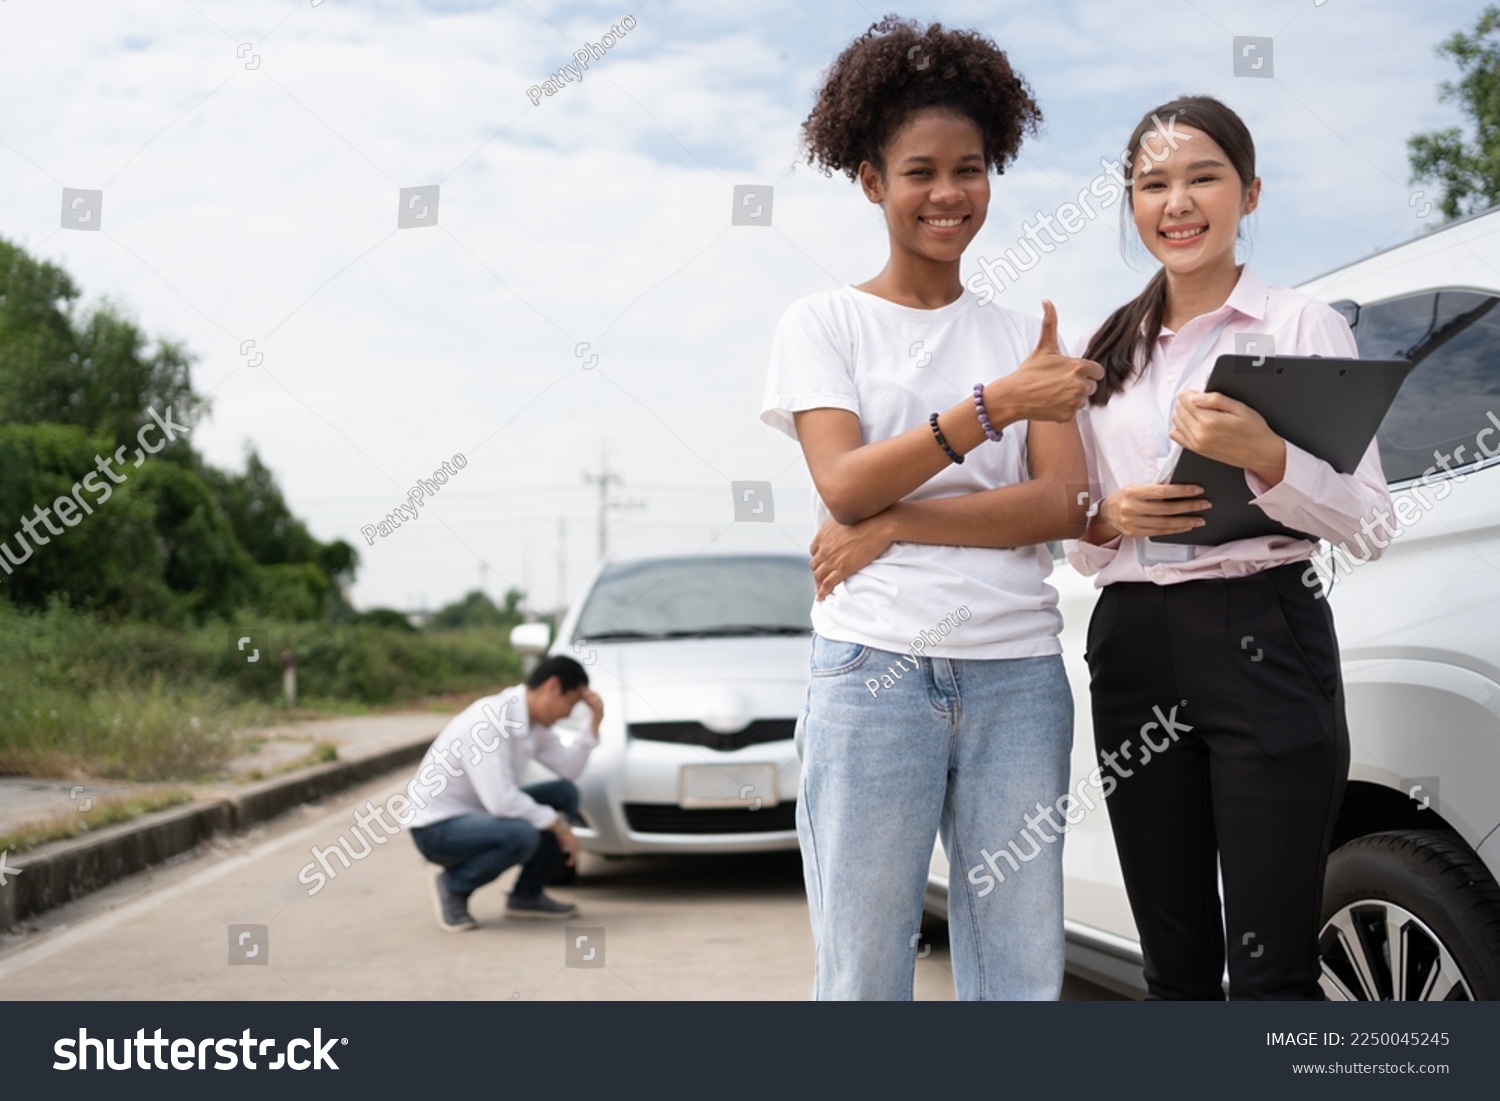 Women drivers Talk to Insurance Agent for examining damaged car and customer checks on the report claim form after an accident. Concept of insurance, advice auto repair shop and car traffic accidents. #2250045245